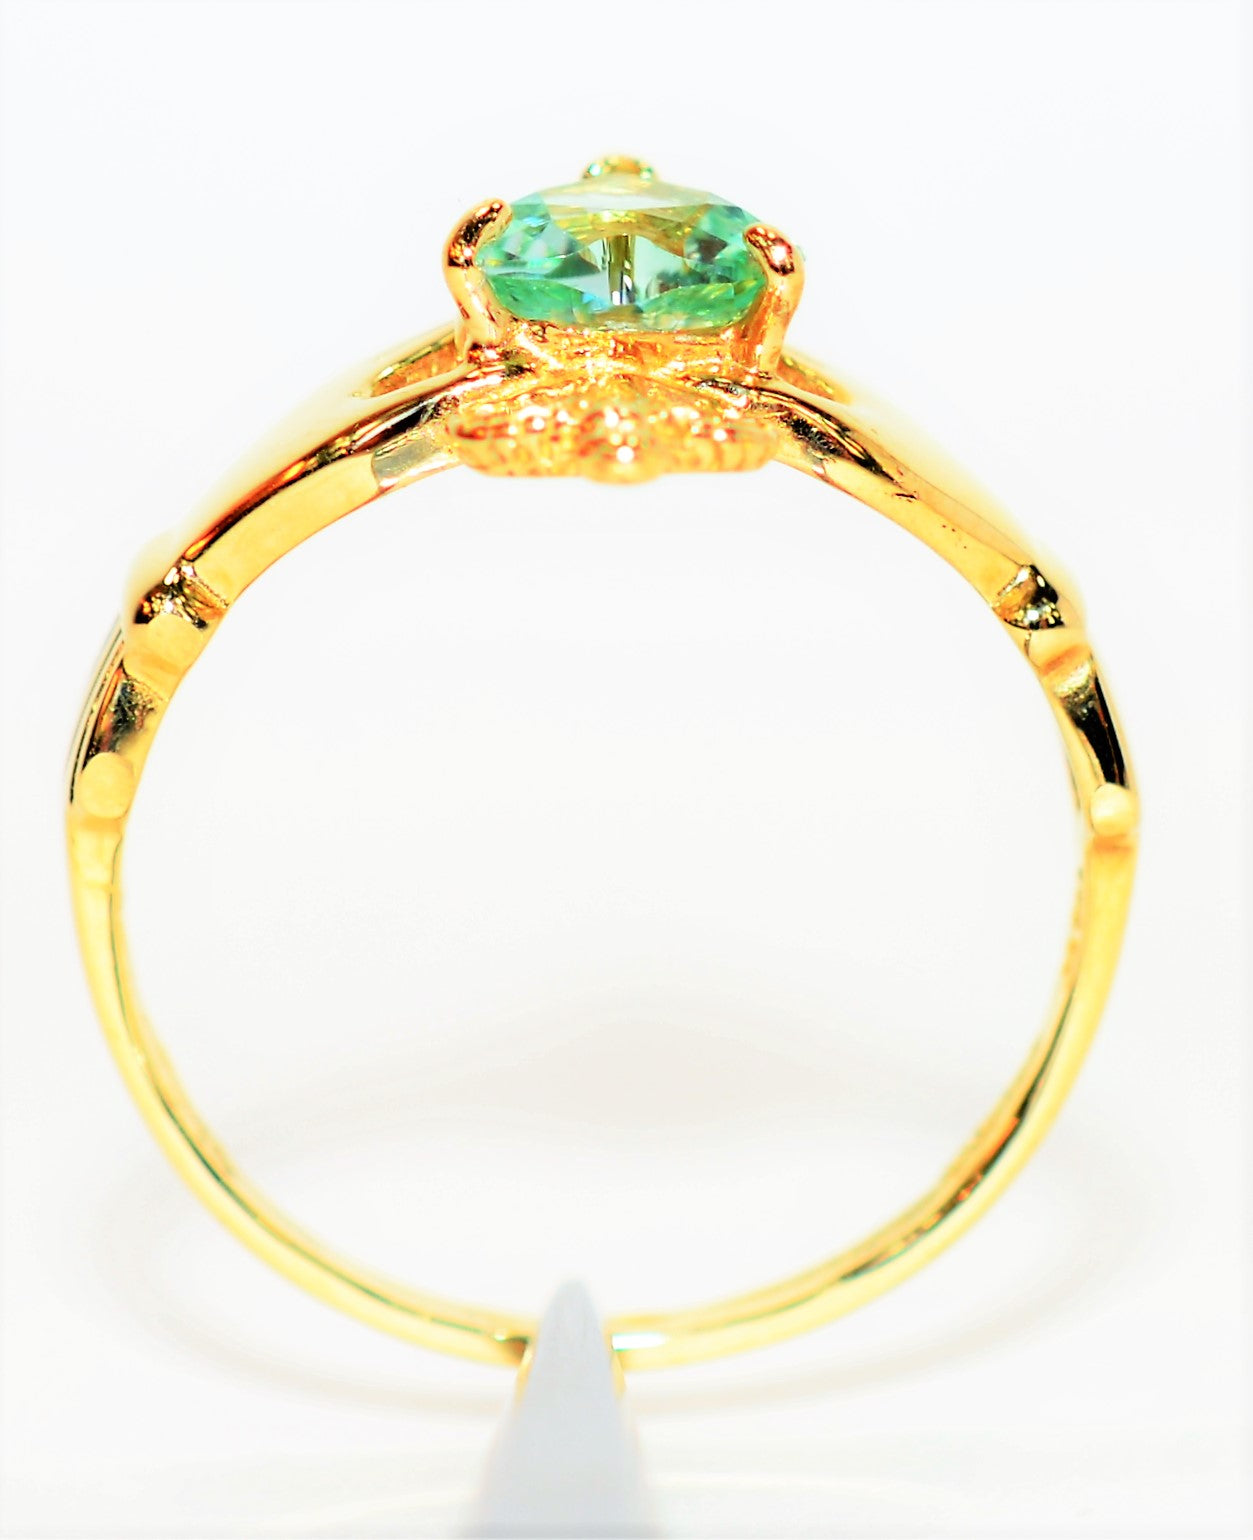 Certified Natural Paraiba Tourmaline Ring 14K Solid Gold Irish Claddagh .72ct Gemstone Heart Promise Ring Engagement Estate Jewelry